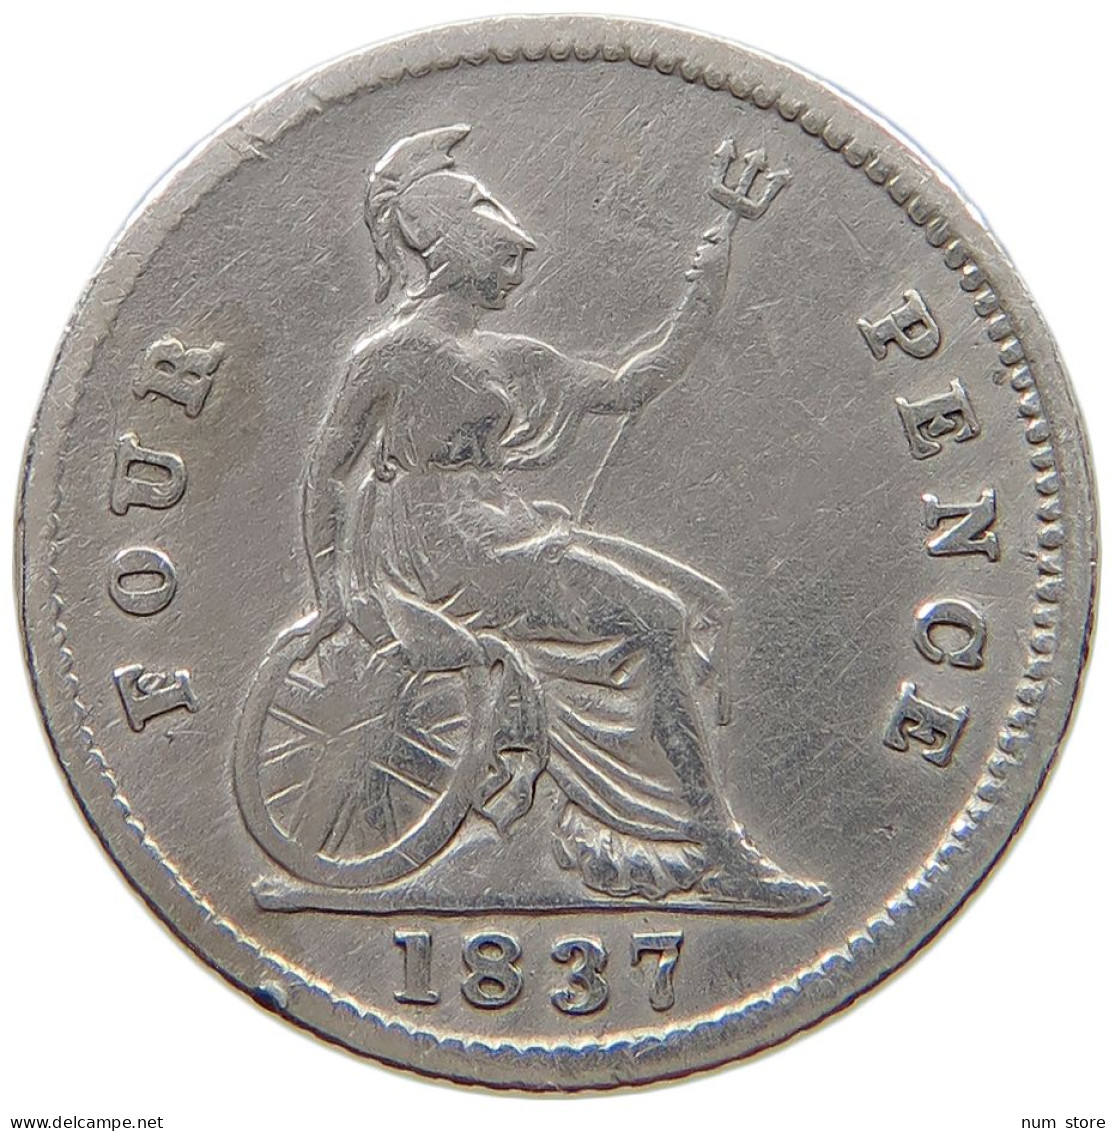 GREAT BRITAIN FOURPENCE 1837 WILLIAM IV. (1830-1837) #a002 0181 - G. 4 Pence/ Groat